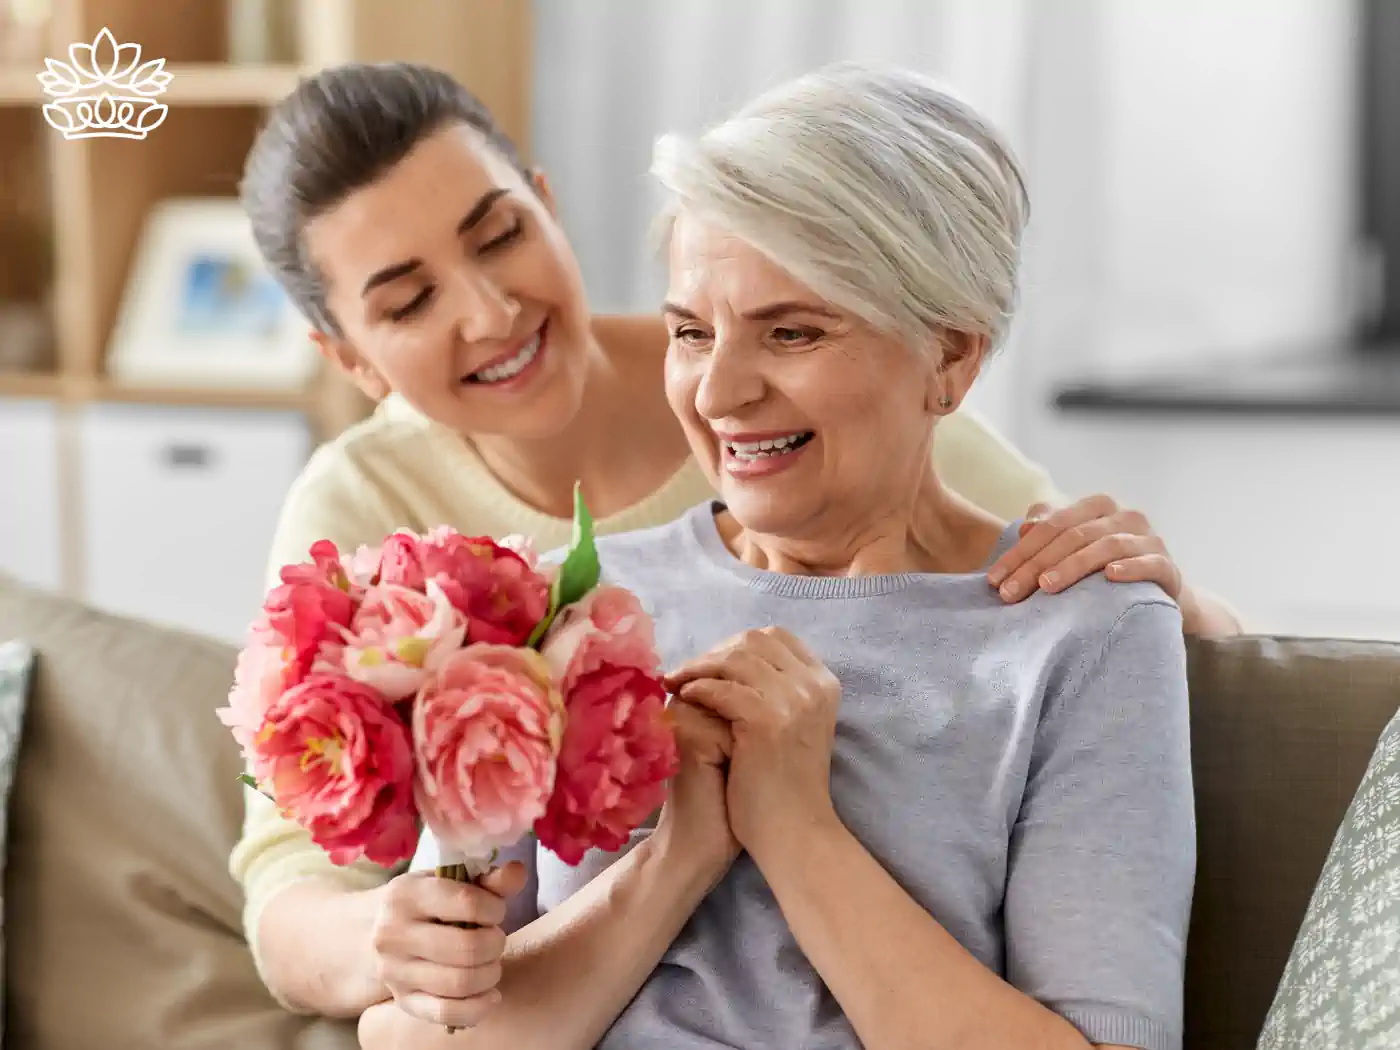 A younger woman presents a bouquet of lush pink peonies to an elderly woman, sharing a moment of joy and affection in a cosy living room setting. Fabulous Flowers and Gifts delivered with heart. Valentine's Day Flowers.